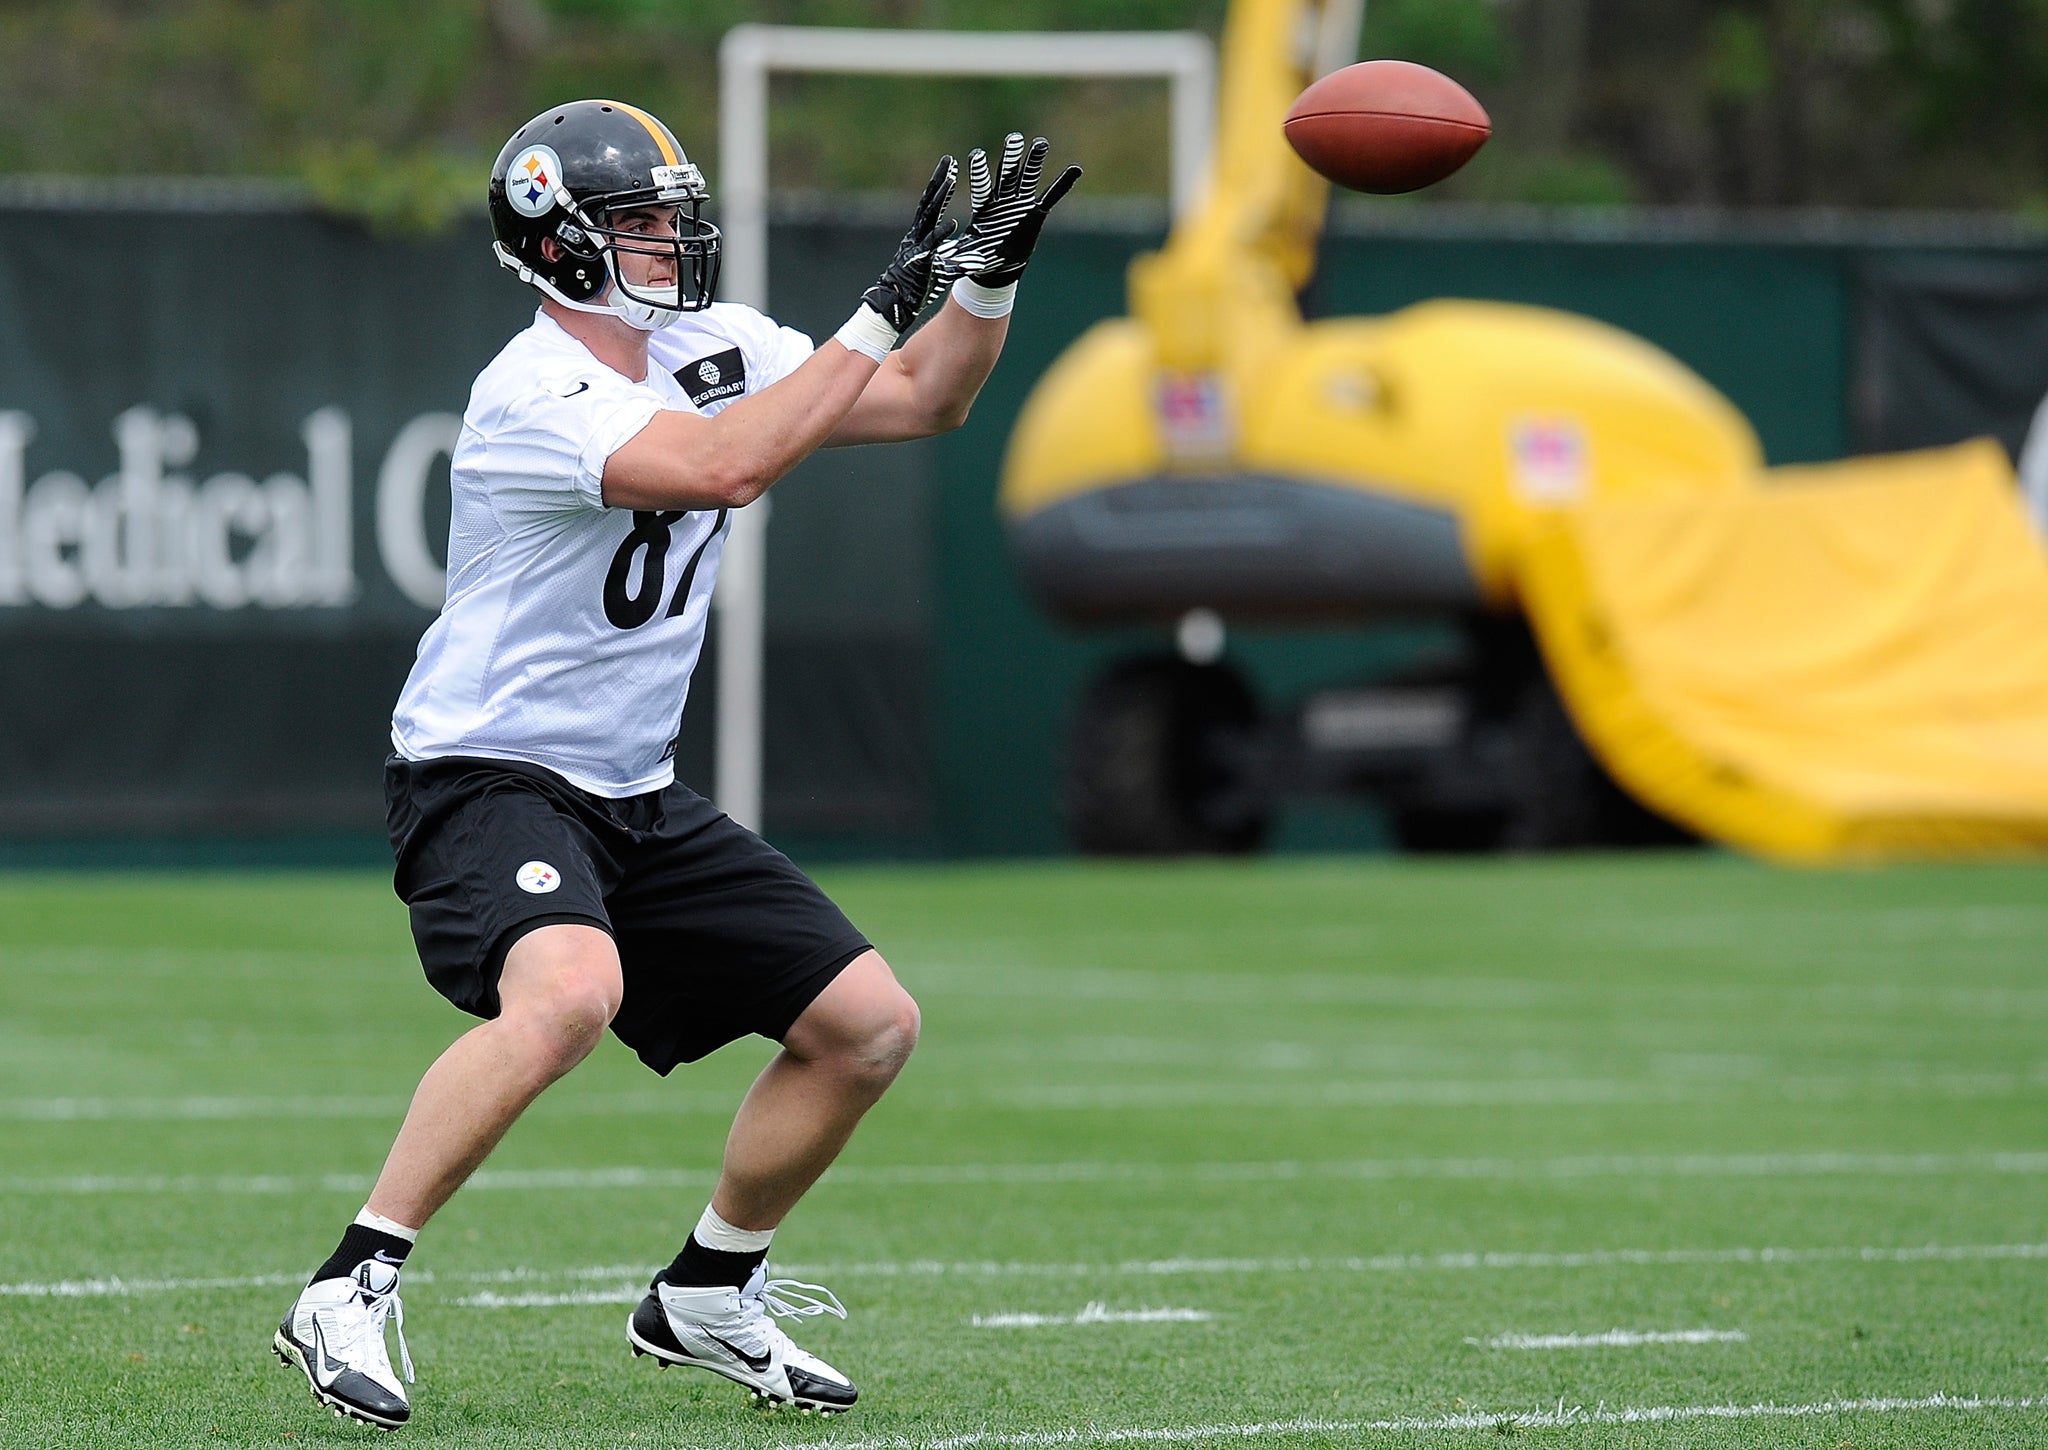 Rob Blanchflower (not related) of the Pittsburgh Steelers participates in drills during rookie minicamp at the Pittsburgh Steelers Training Facility on May 16, 2014